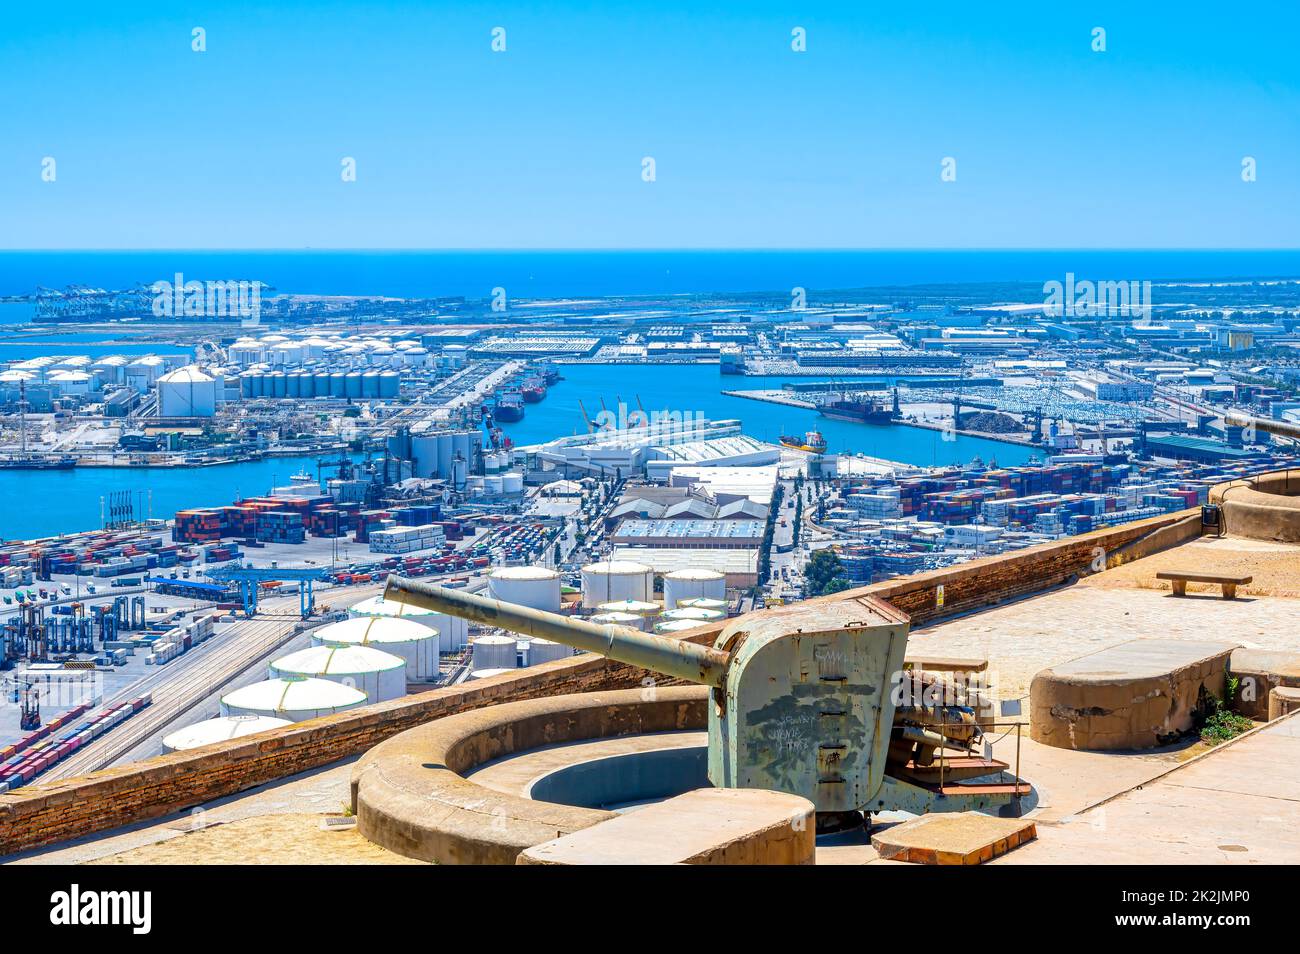 Montjuic Castle or Fort. High-angle view of a weapon with the port cityscape in the background. Stock Photo